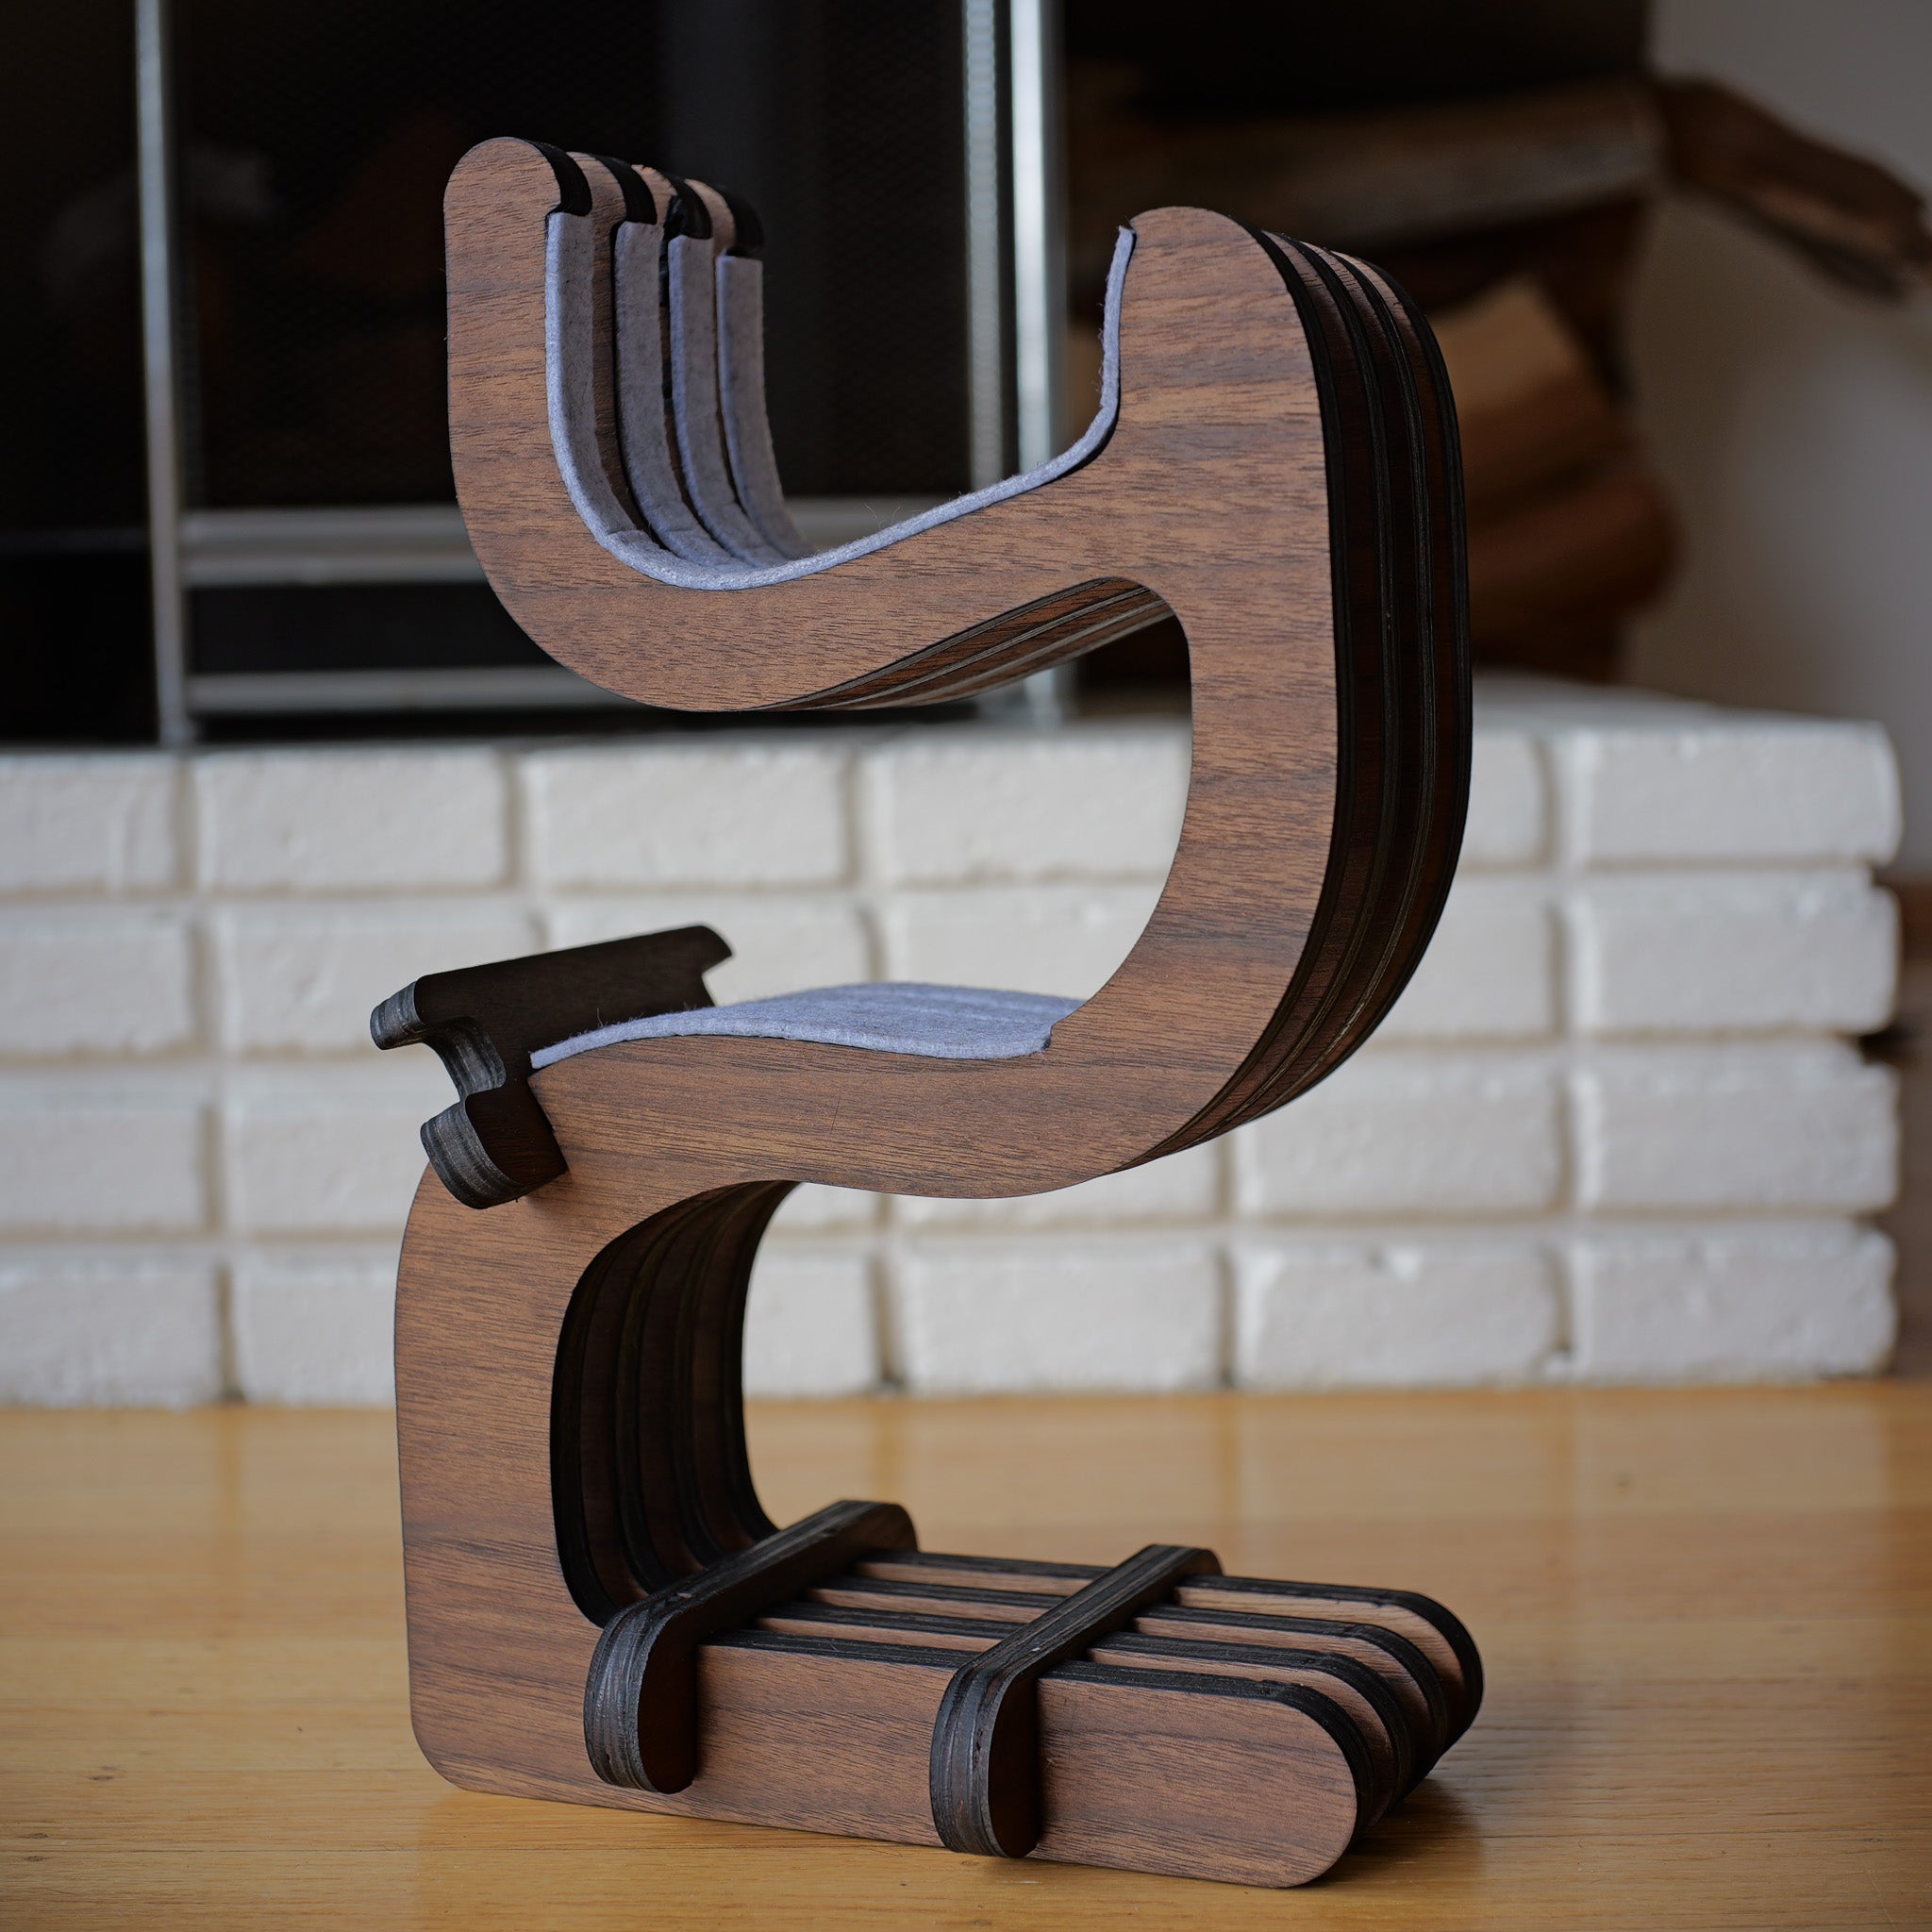 *PREORDER* Apple Vision Pro Stand Walnut Swerve Stand